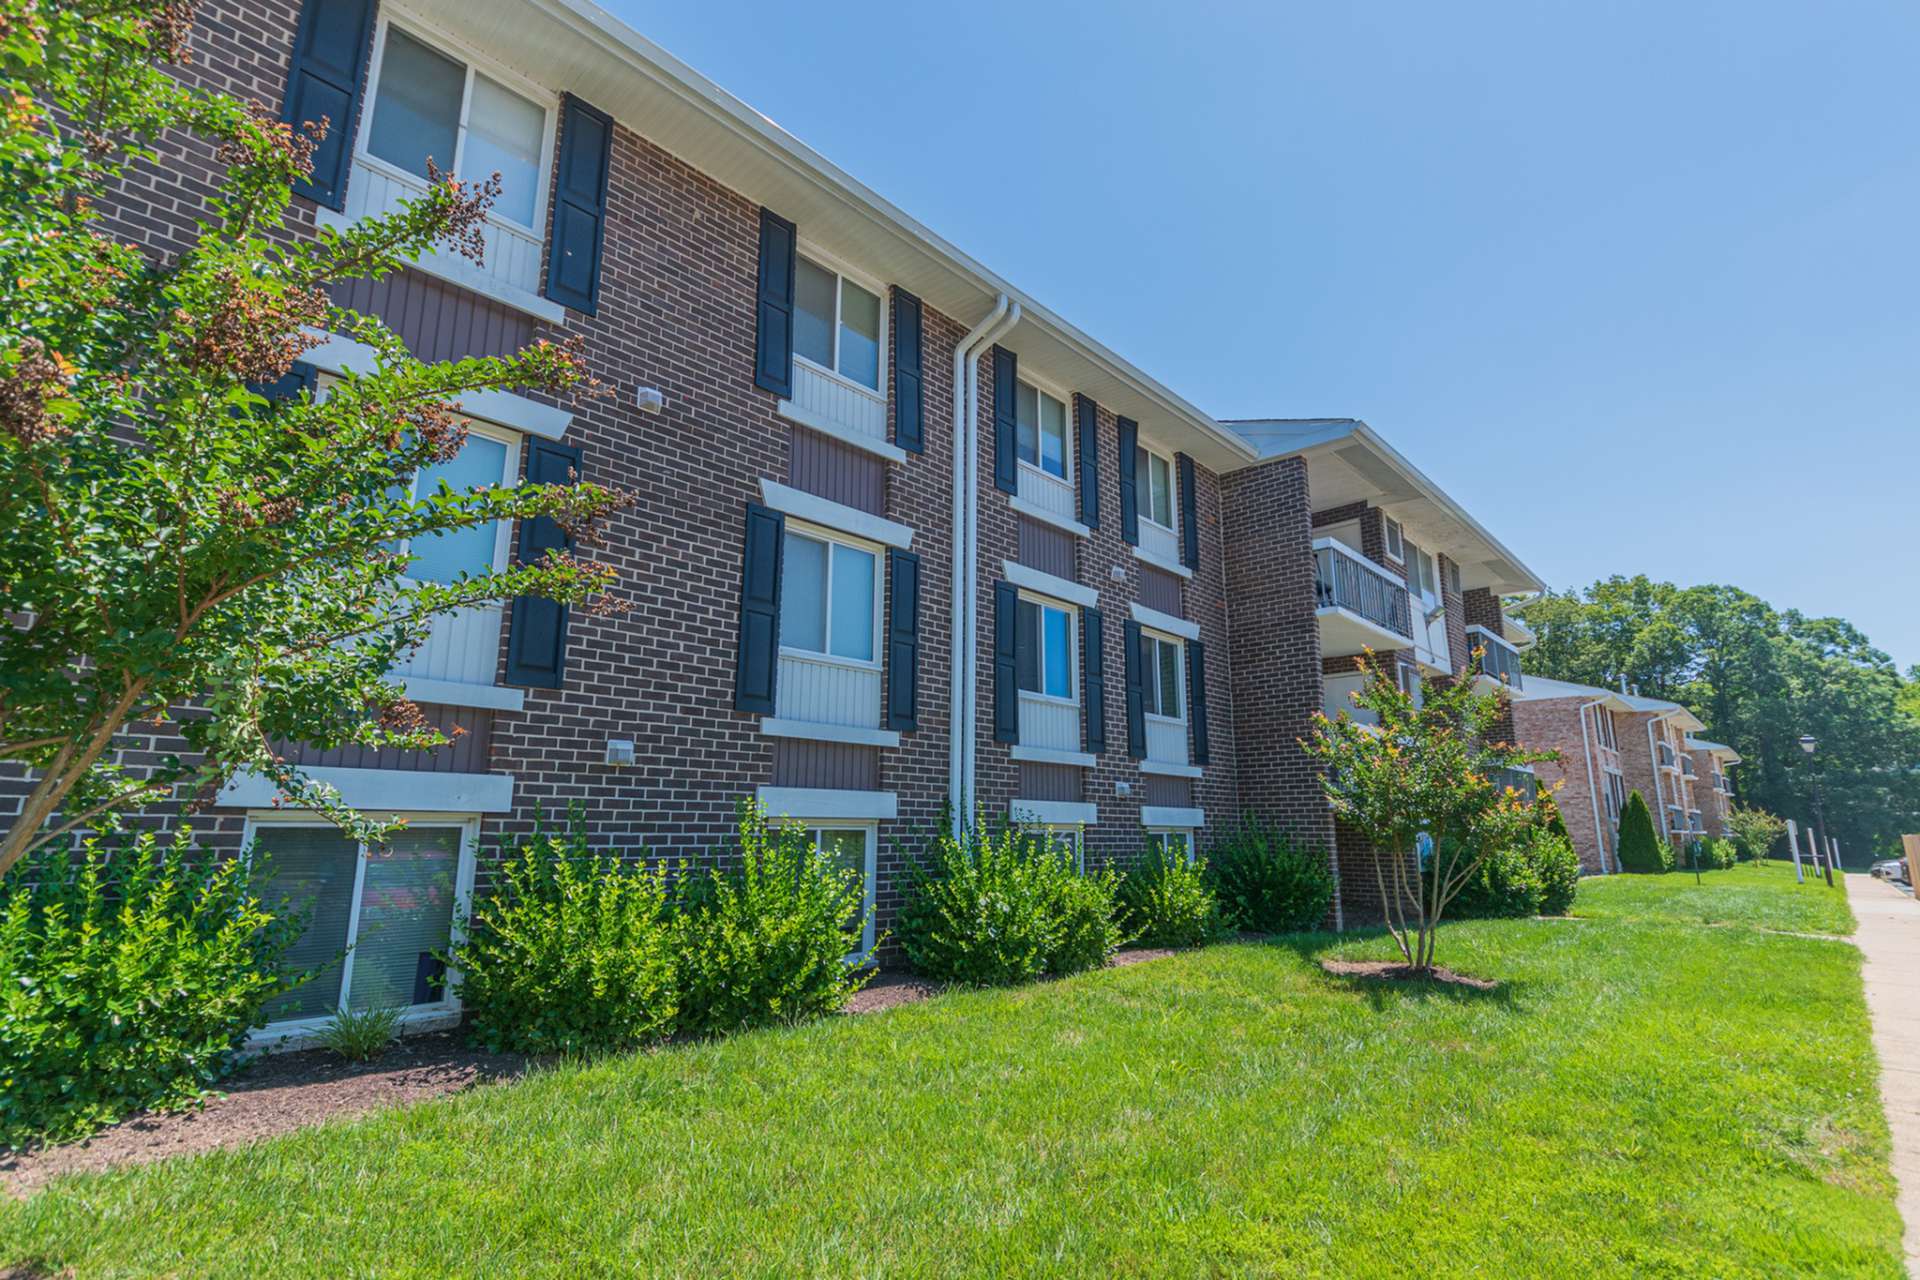 Exterior of an apartment building at Chesapeake Village apartments, fitted with paved walkway, and a lawn